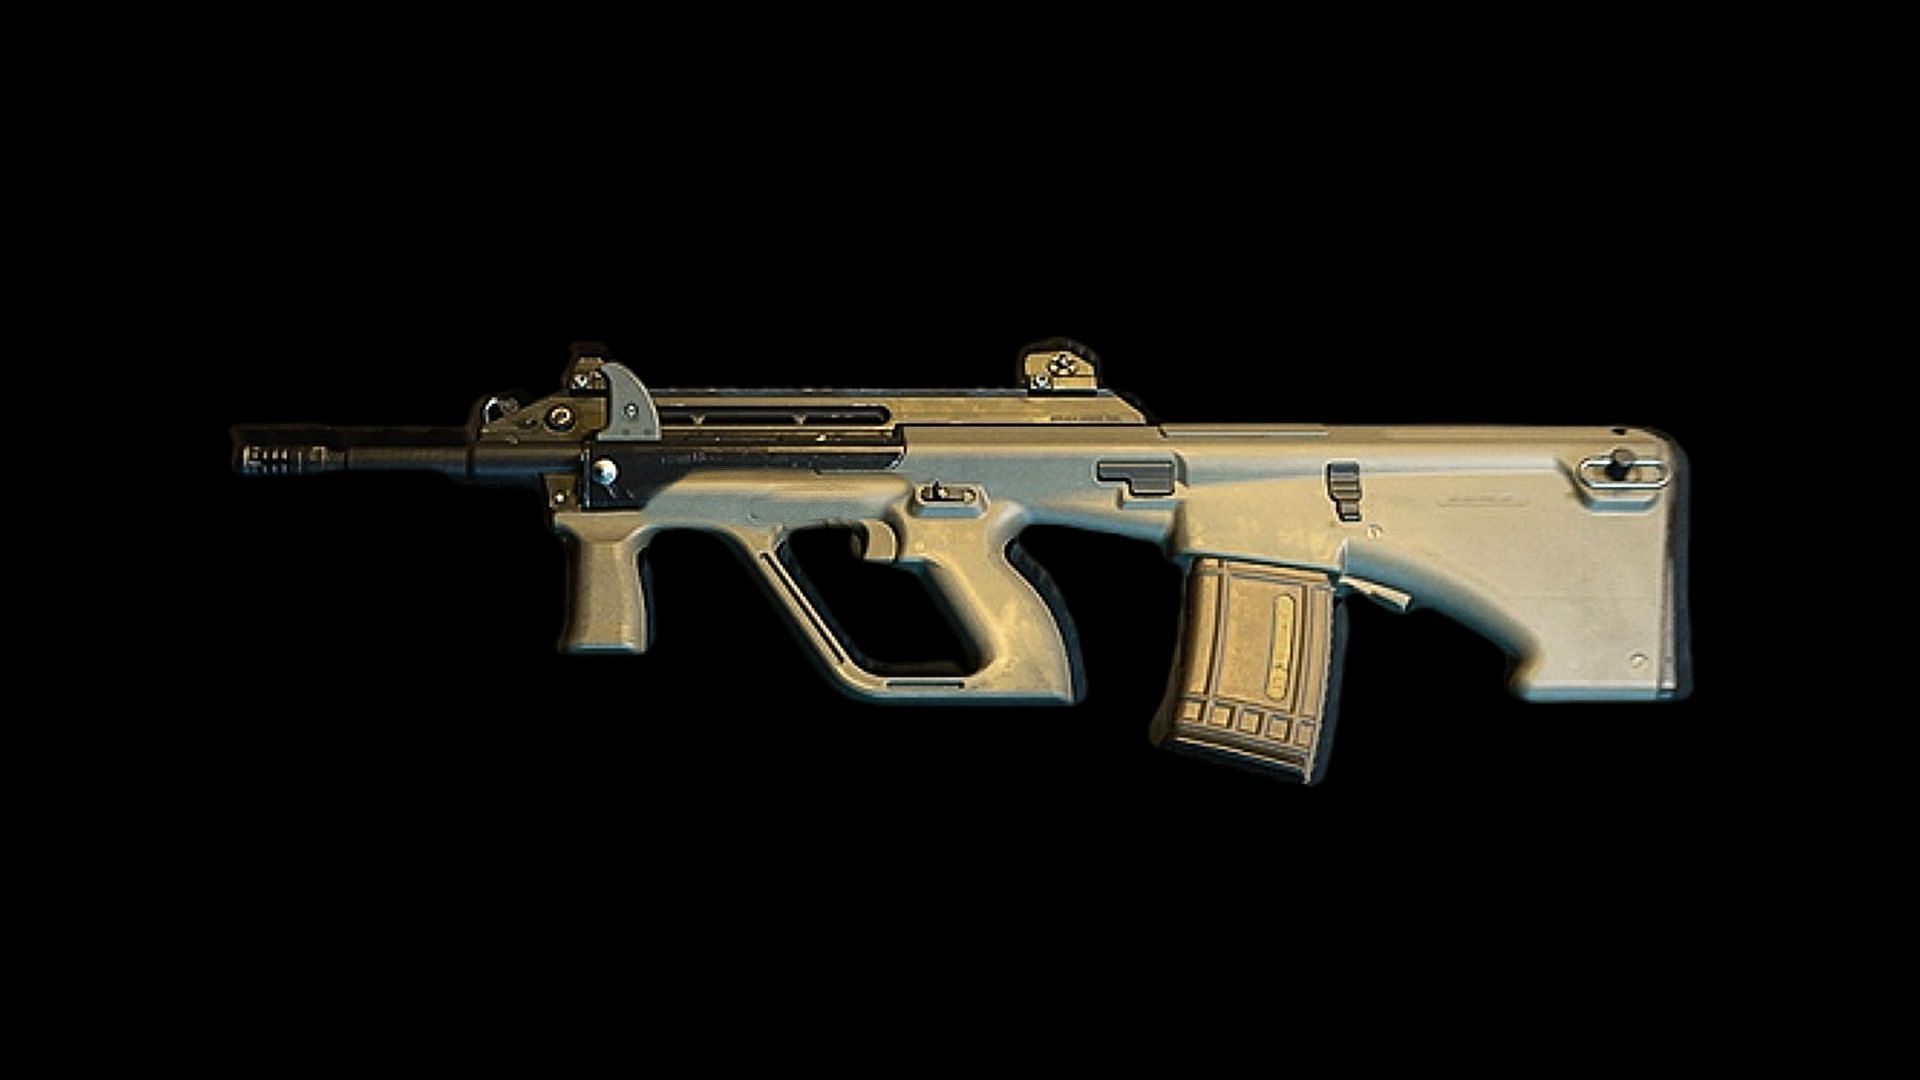 The STB 556 assault rifle in MW2 (Image via Activision)